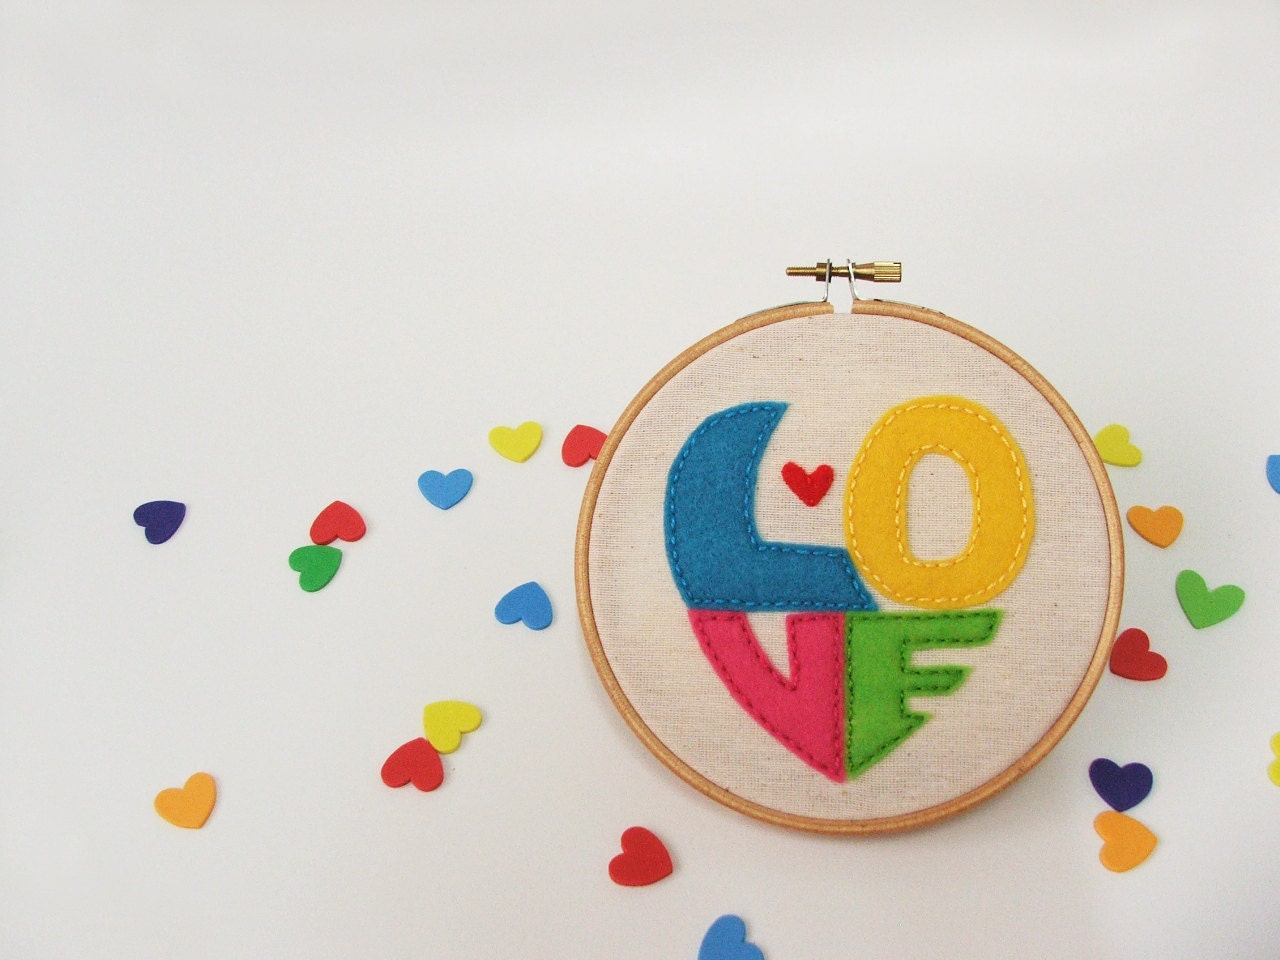 Embroidery hoop wall art - LOVE made to order, great wedding decor